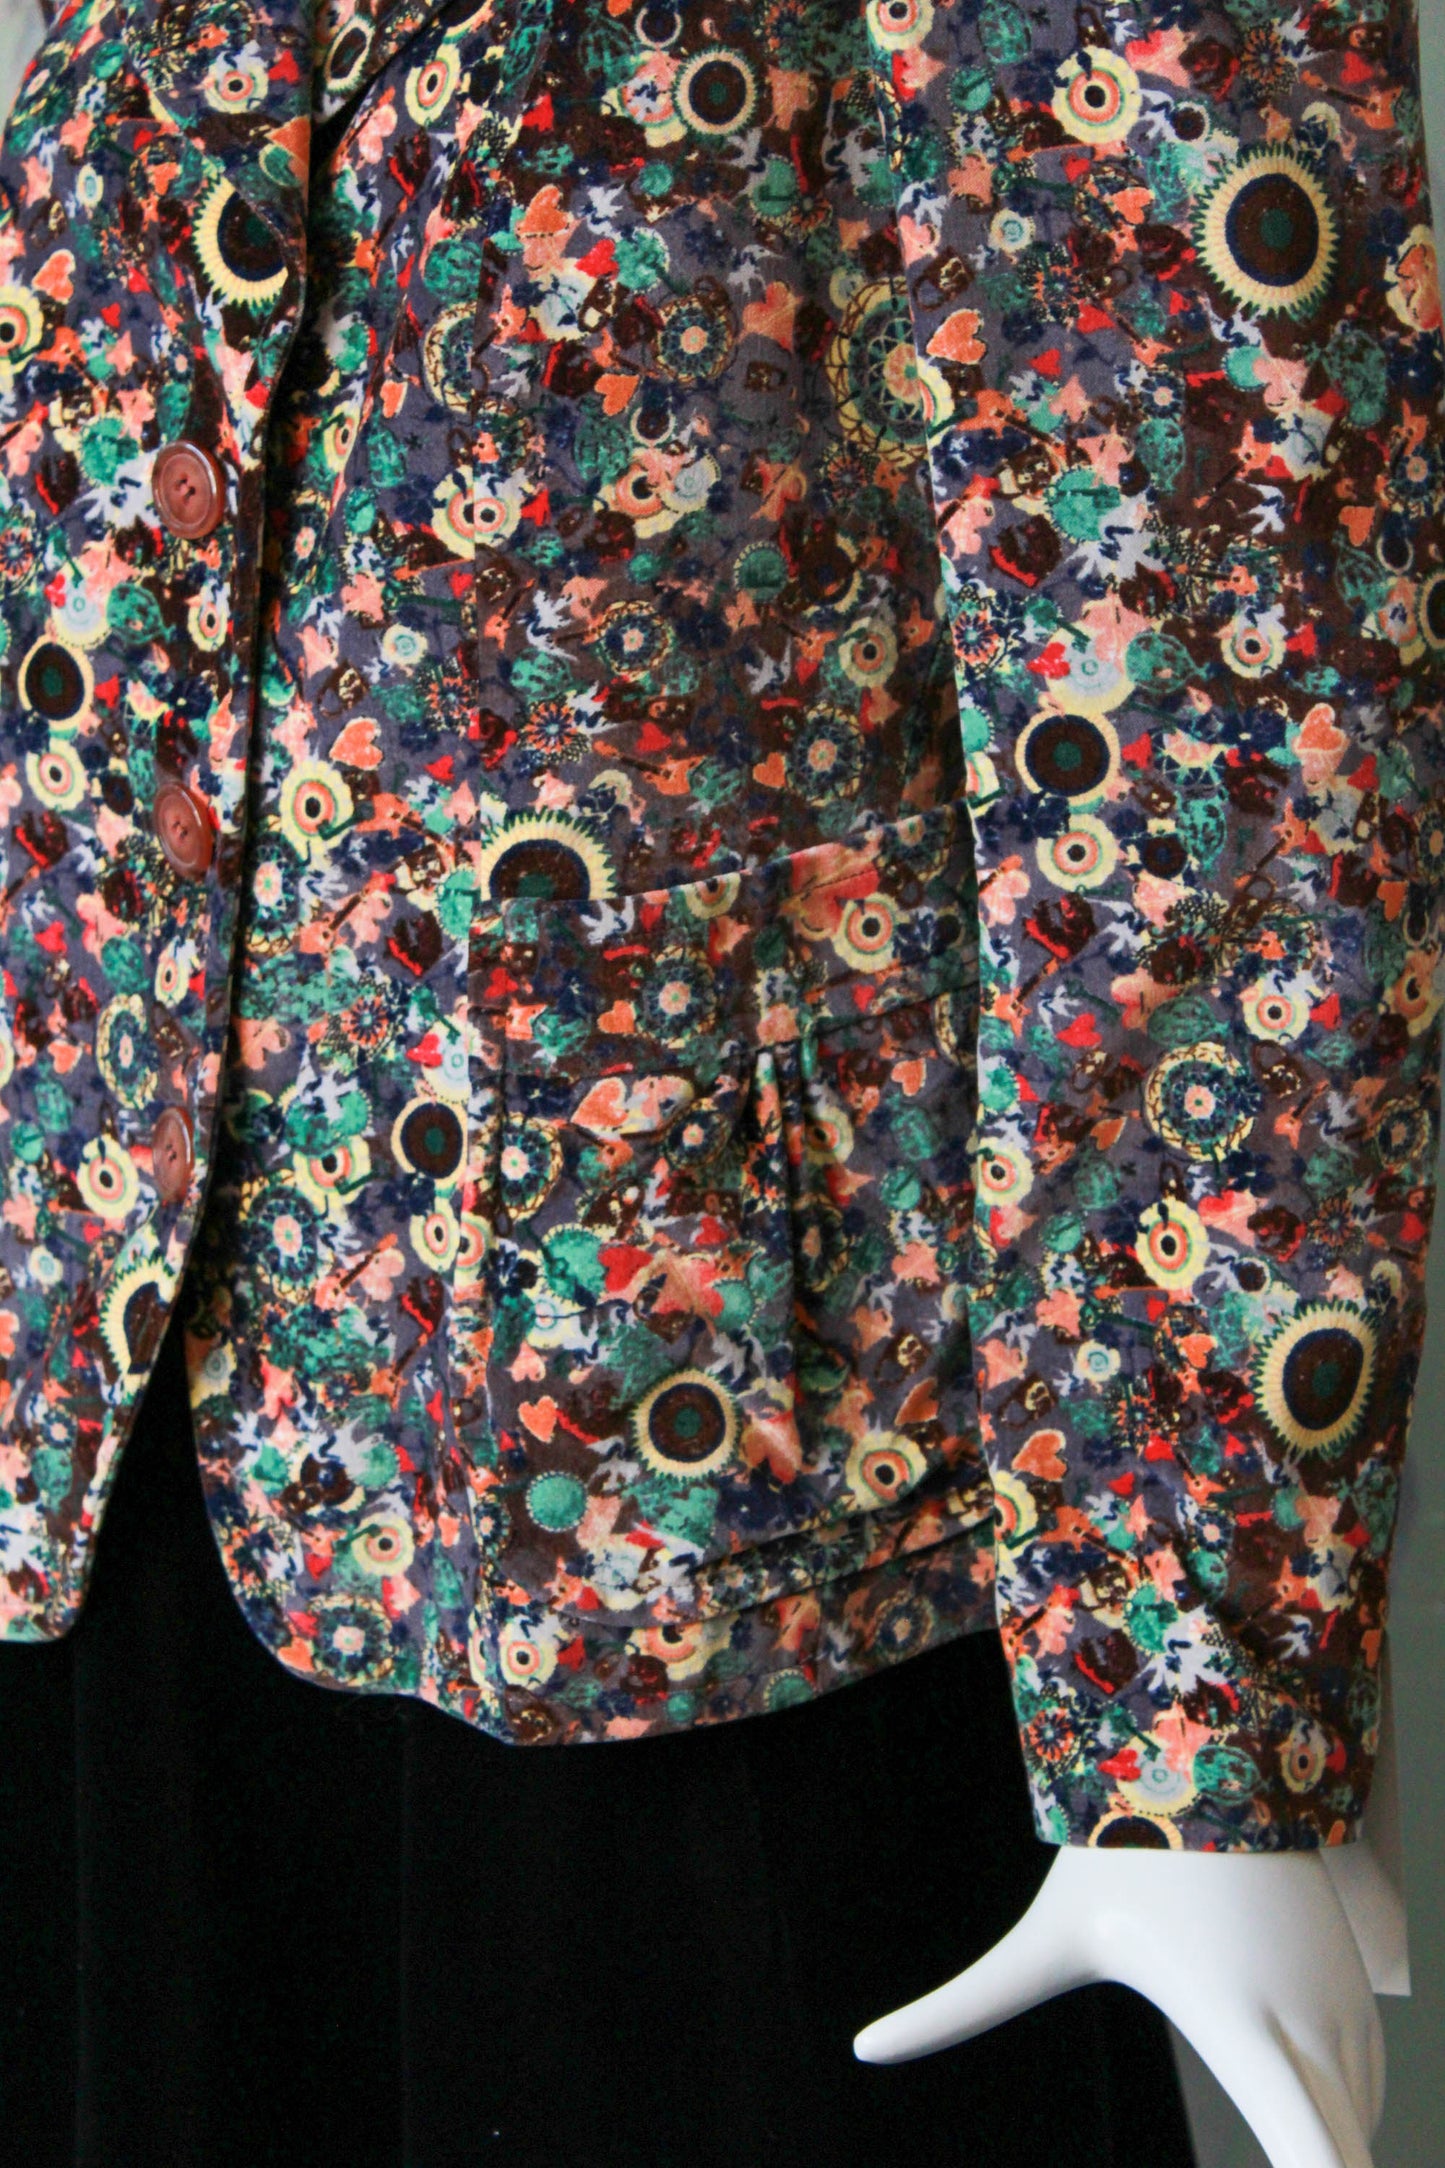 90s Christian Lacroix Floral Velvet Blazer with Pockets, and large collar